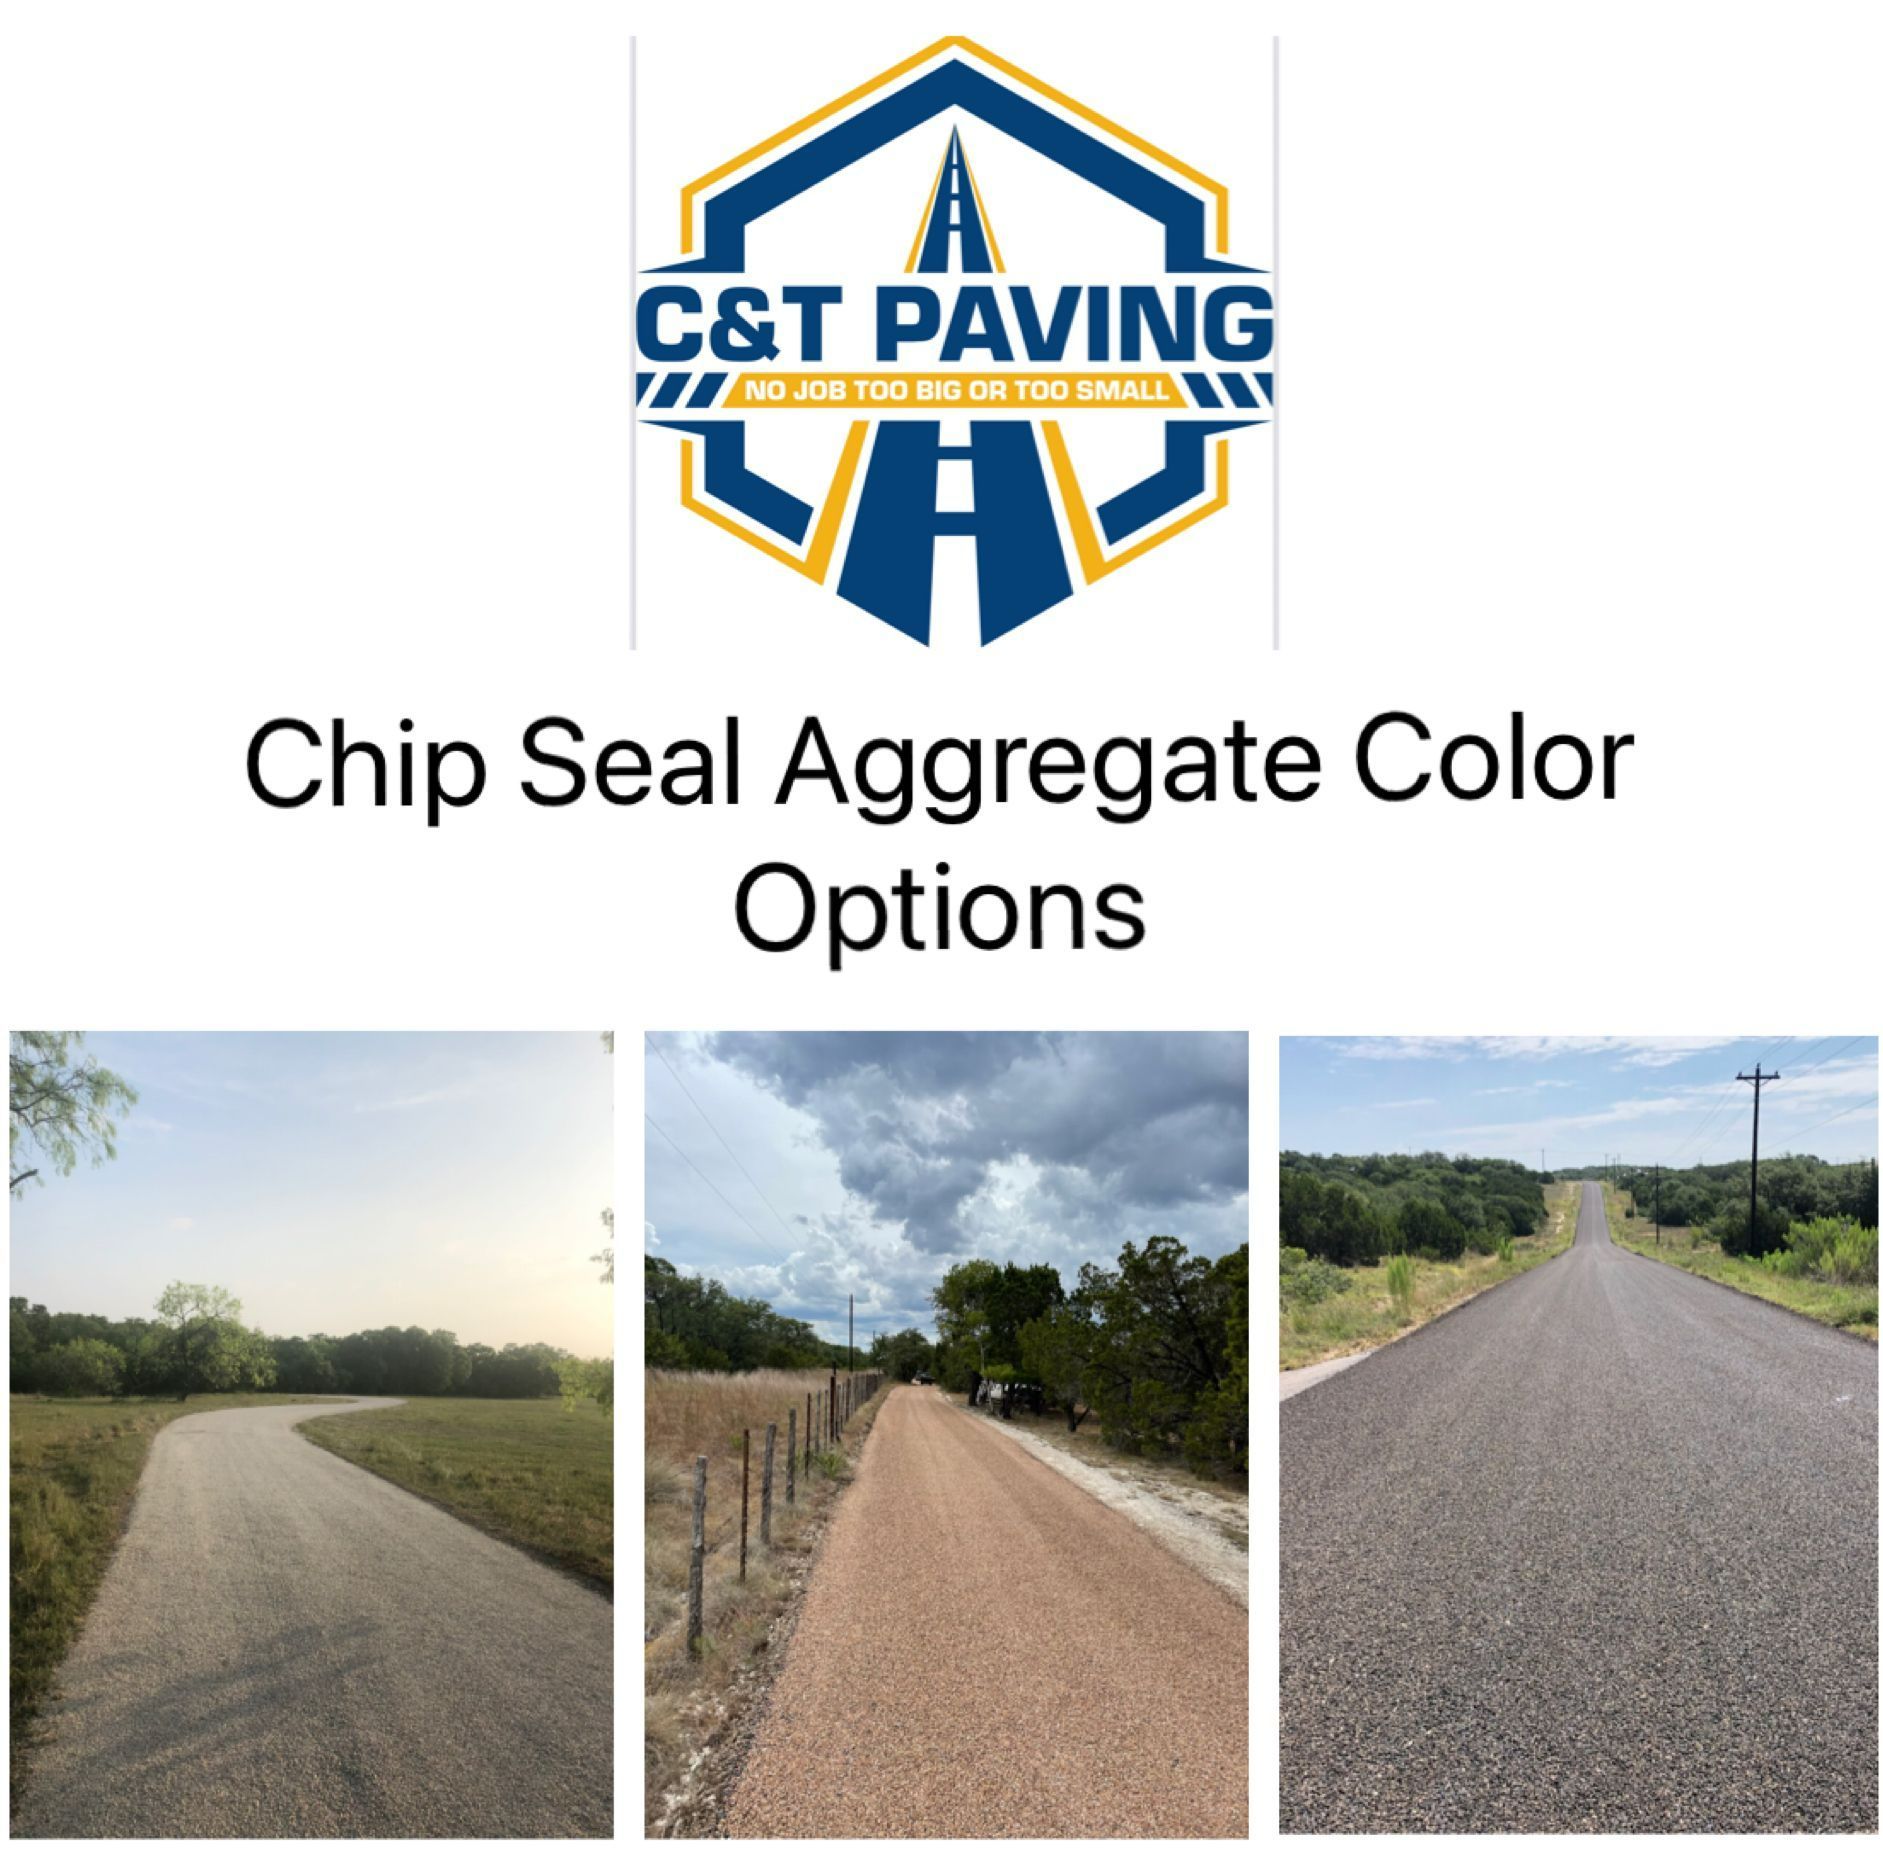 Chil seal aggregate color options